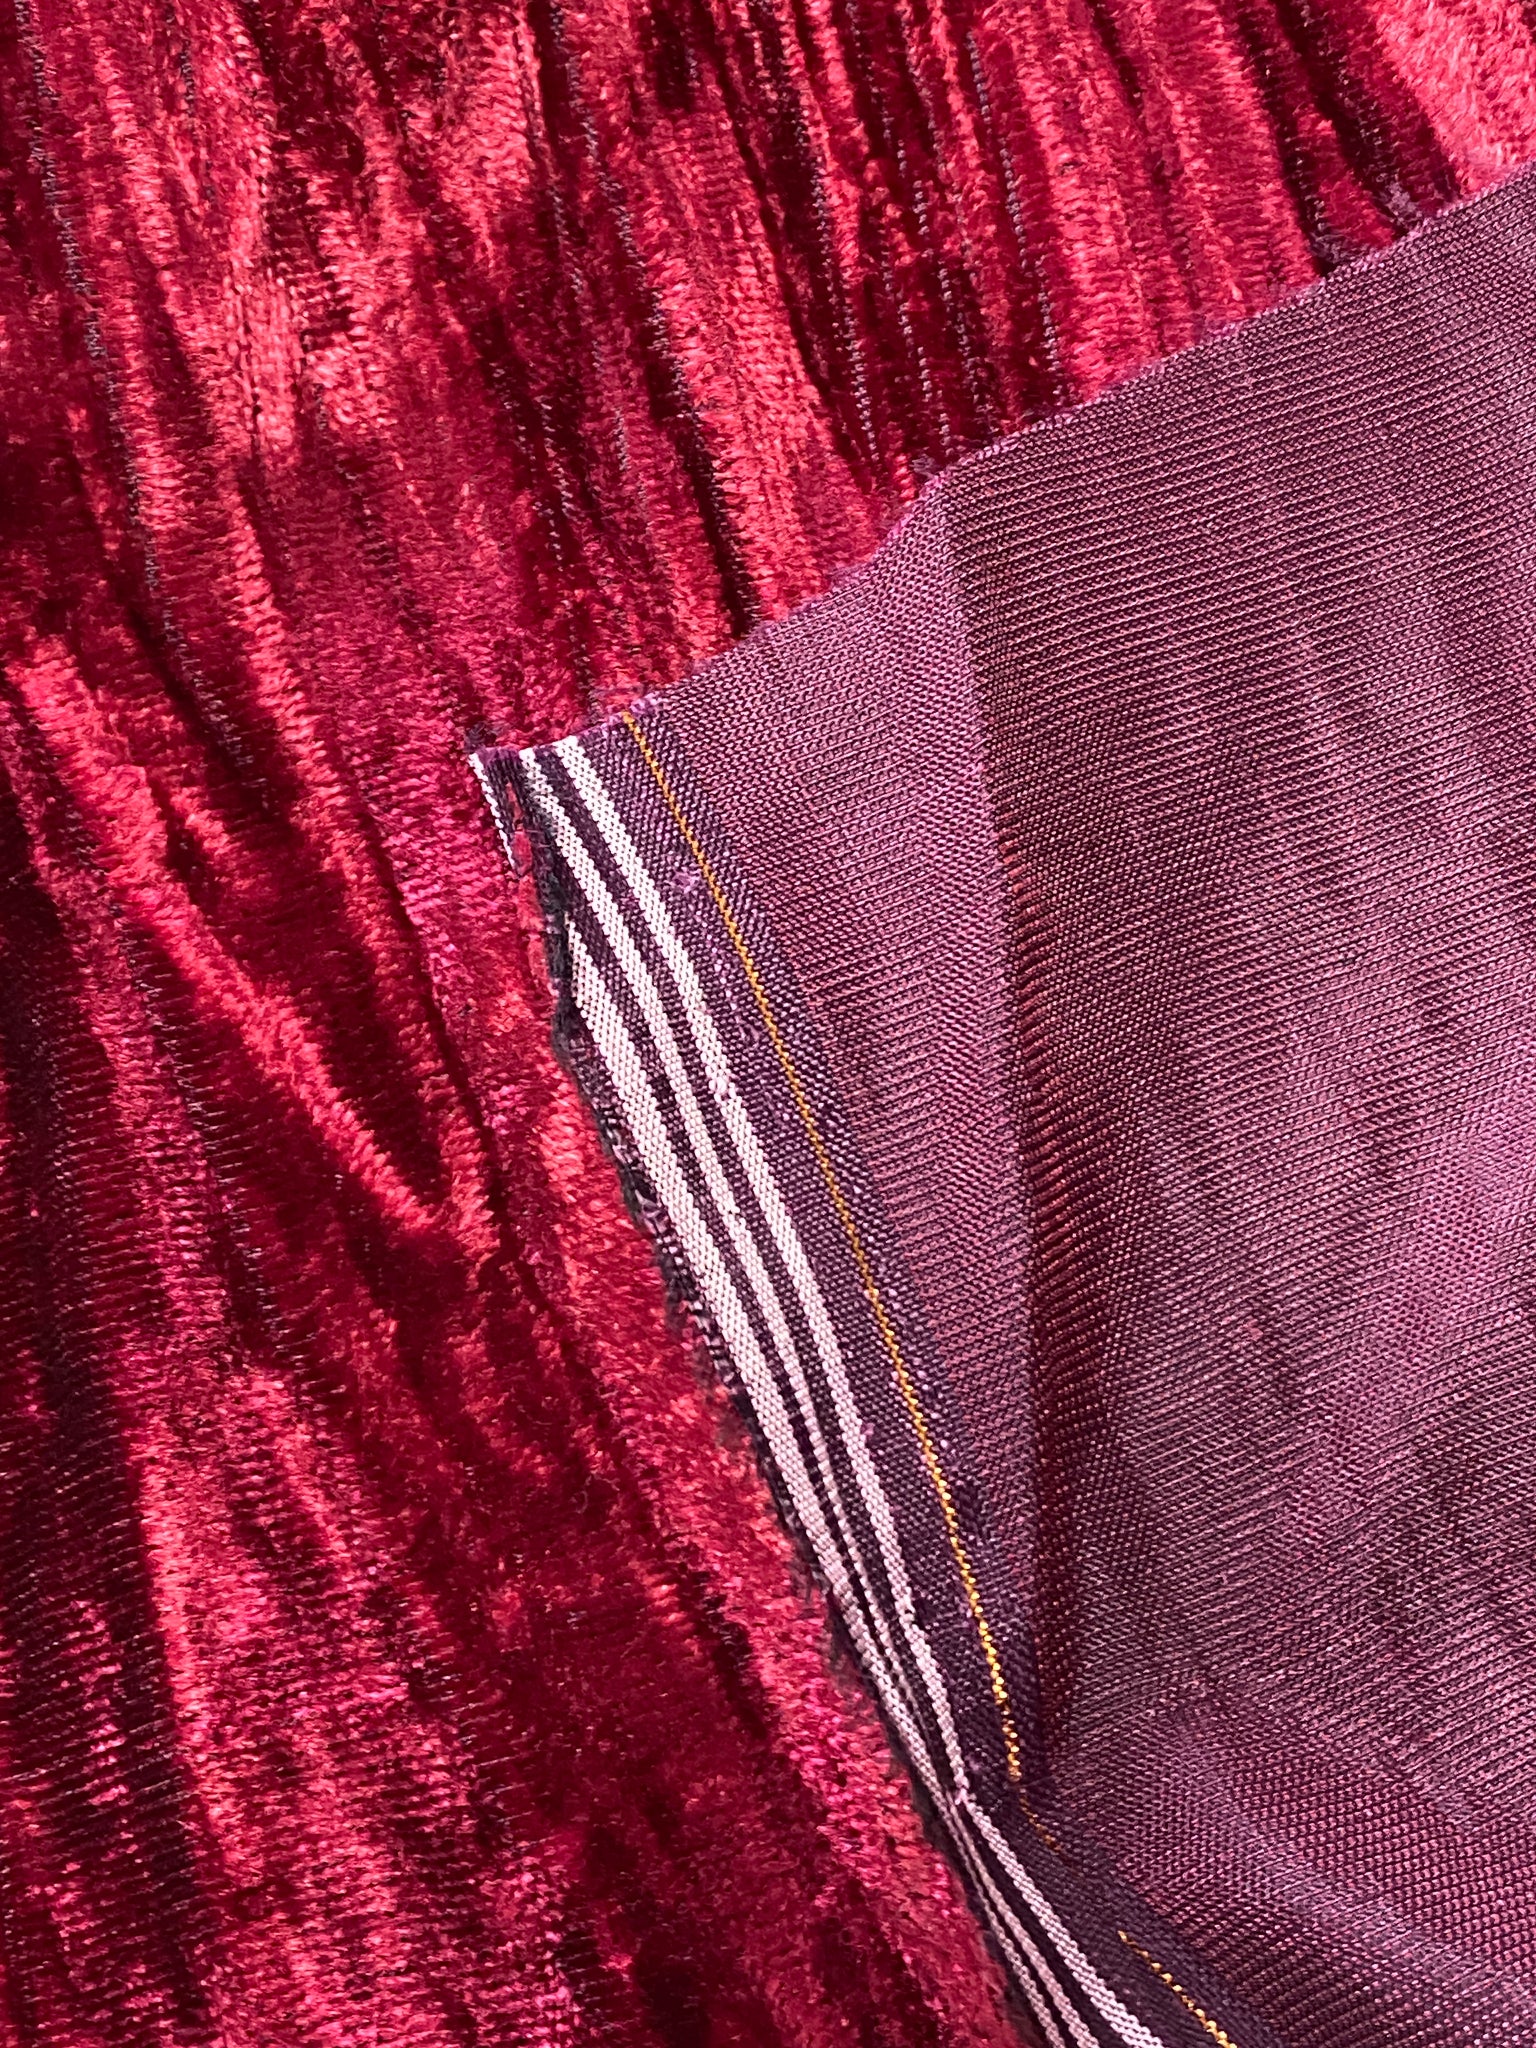 1 x Red Velvet Fabric 45 by The Yard